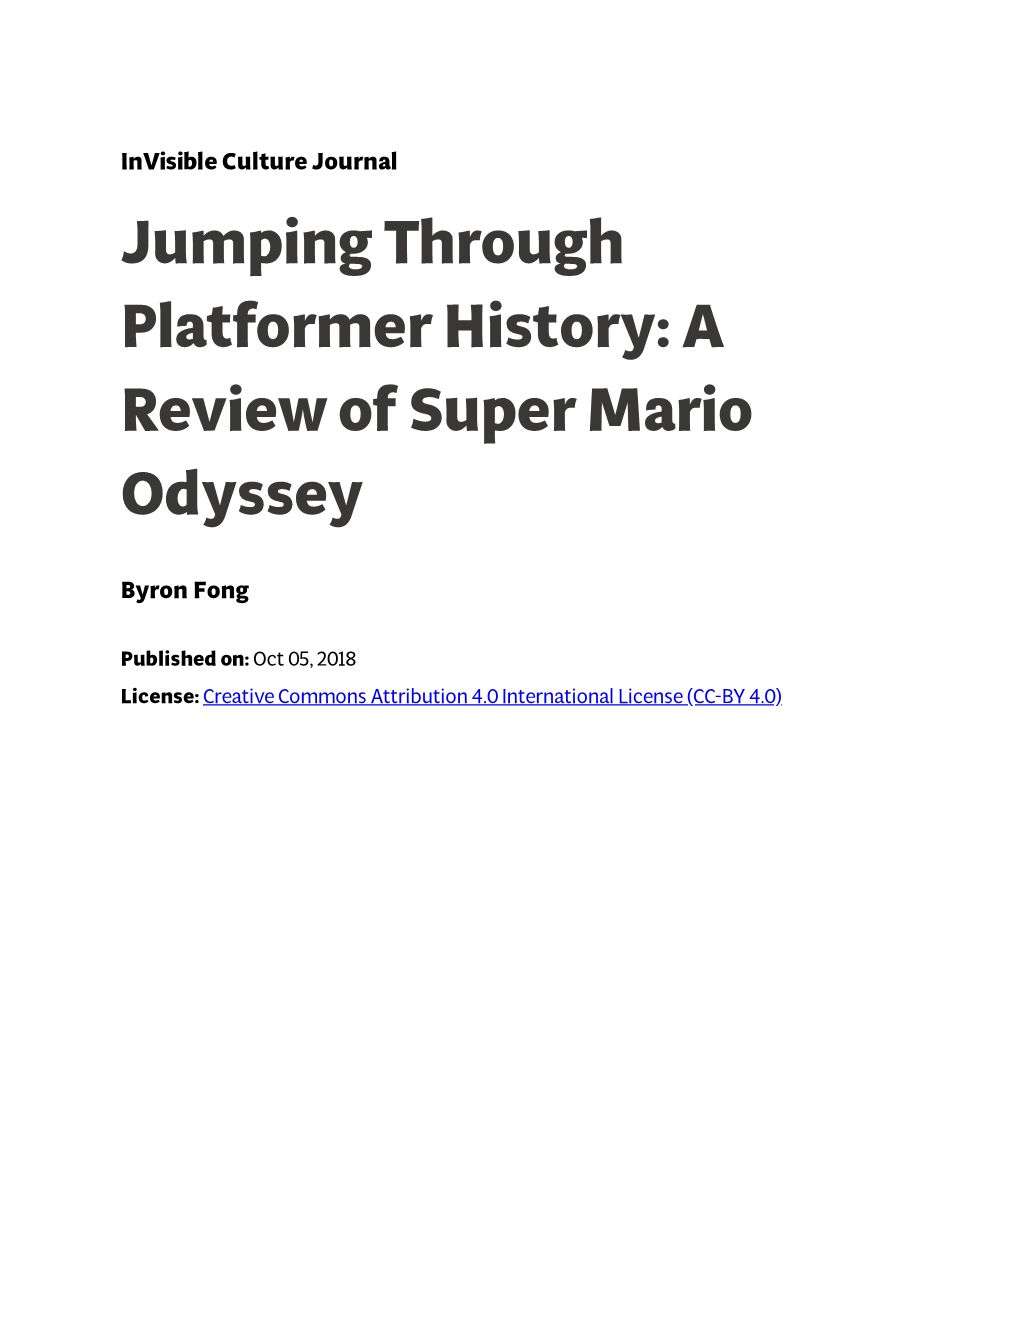 Jumping Through Platformer History: a Review of Super Mario Odyssey